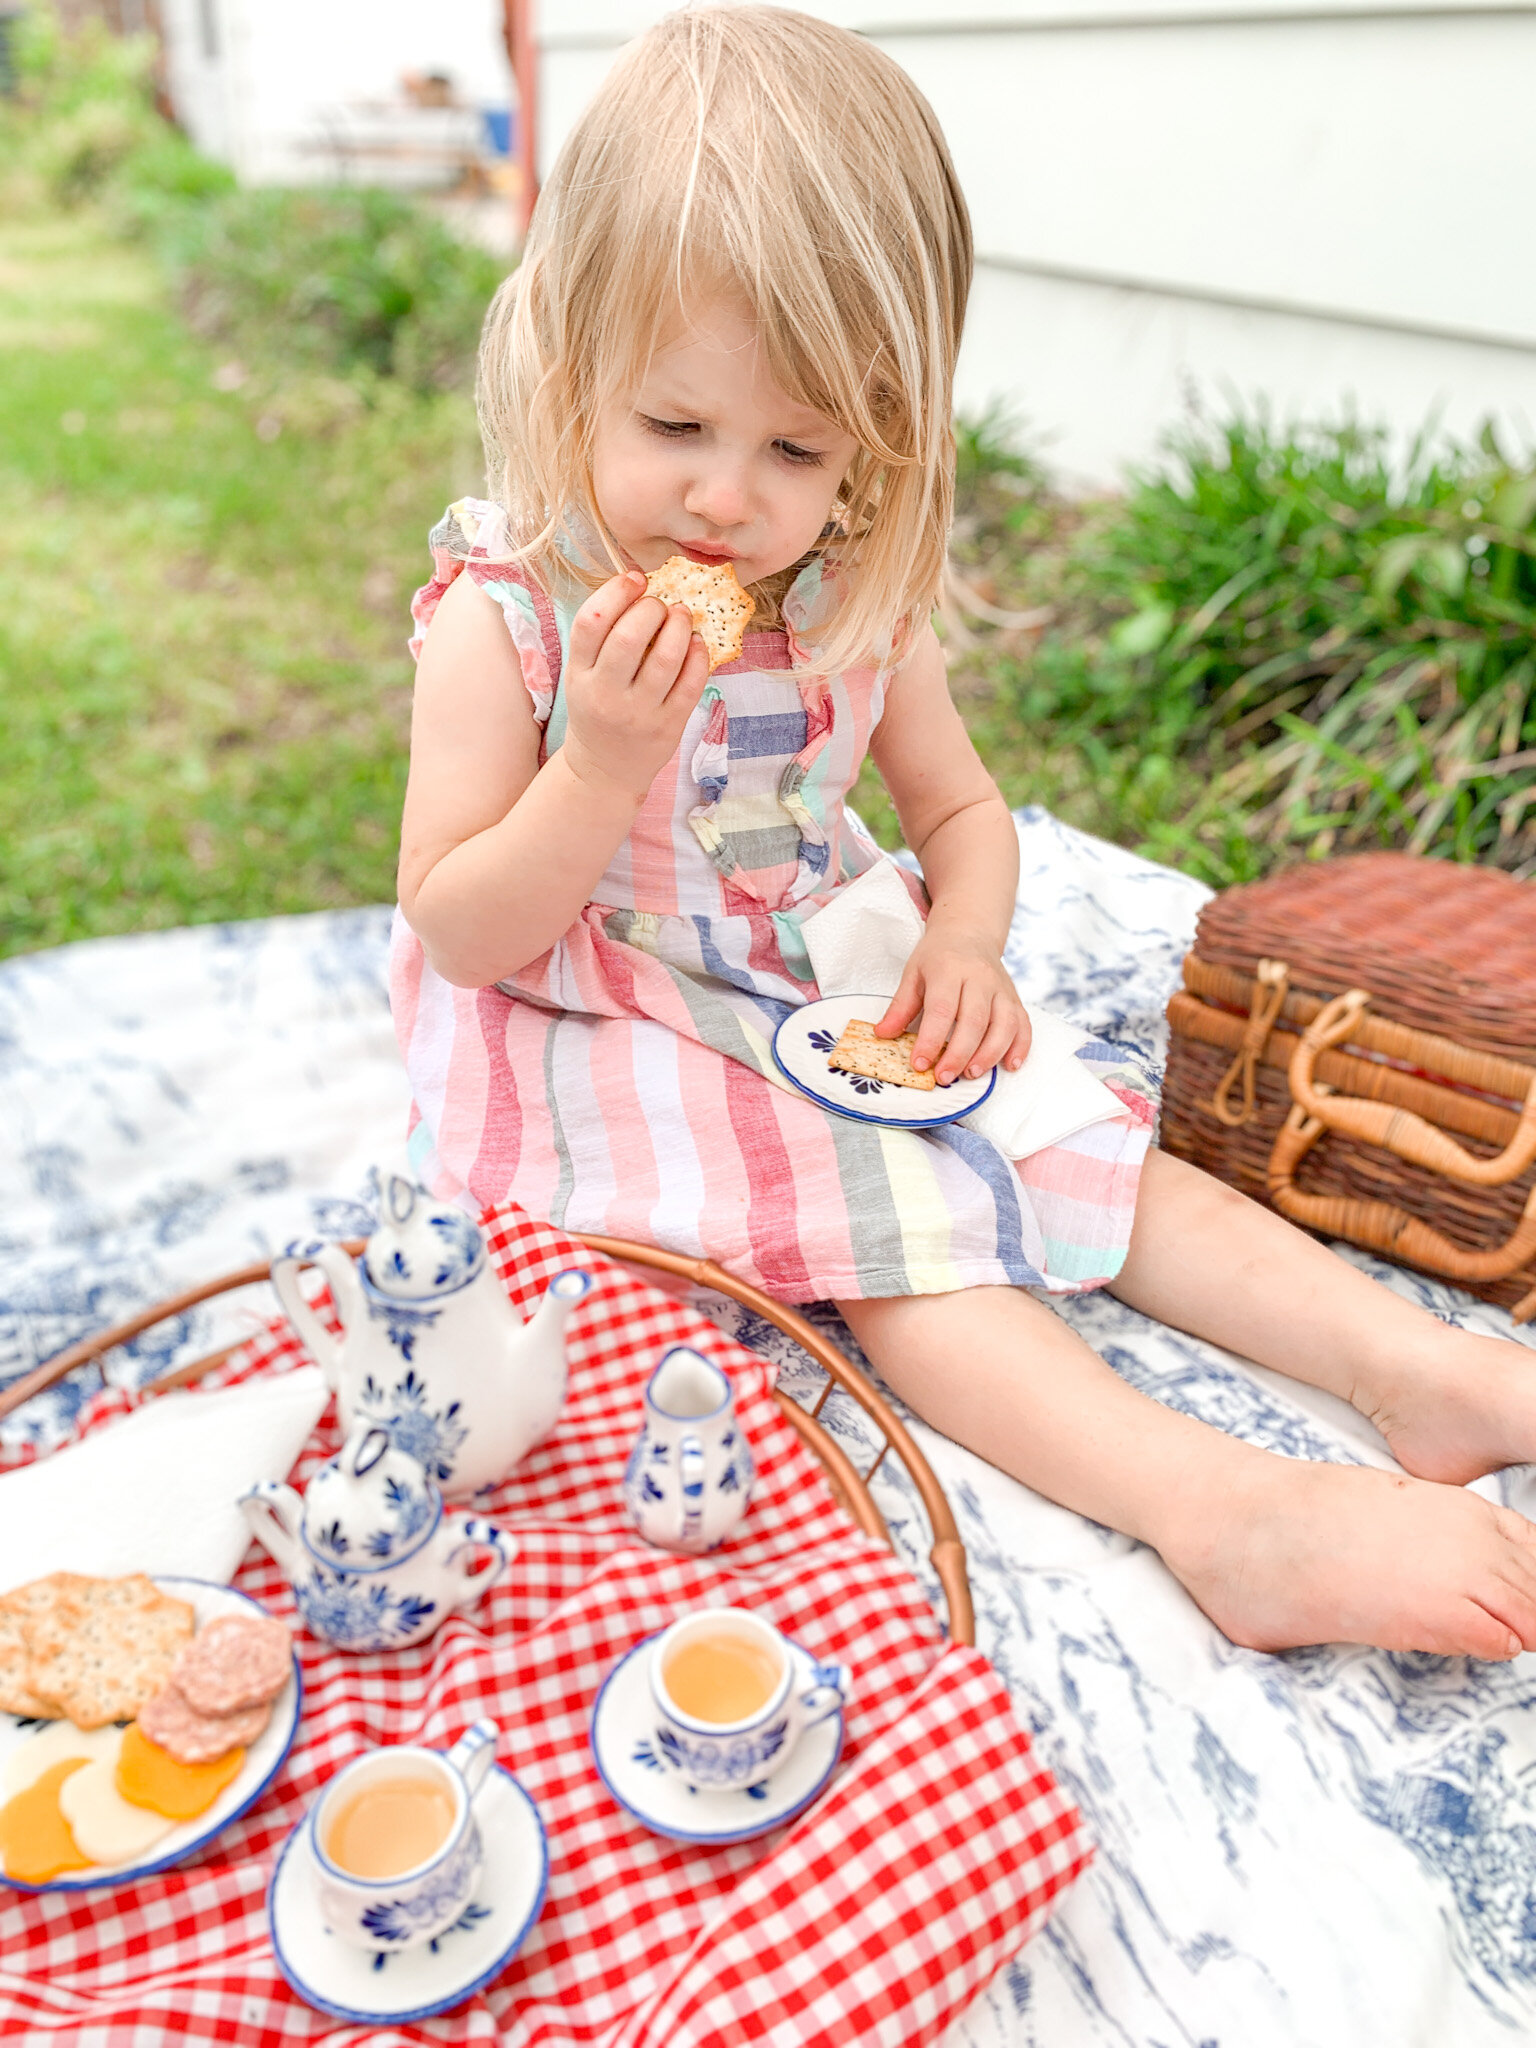 How to Throw a Cheerful and Adorable Vintage Tea Party Picnic